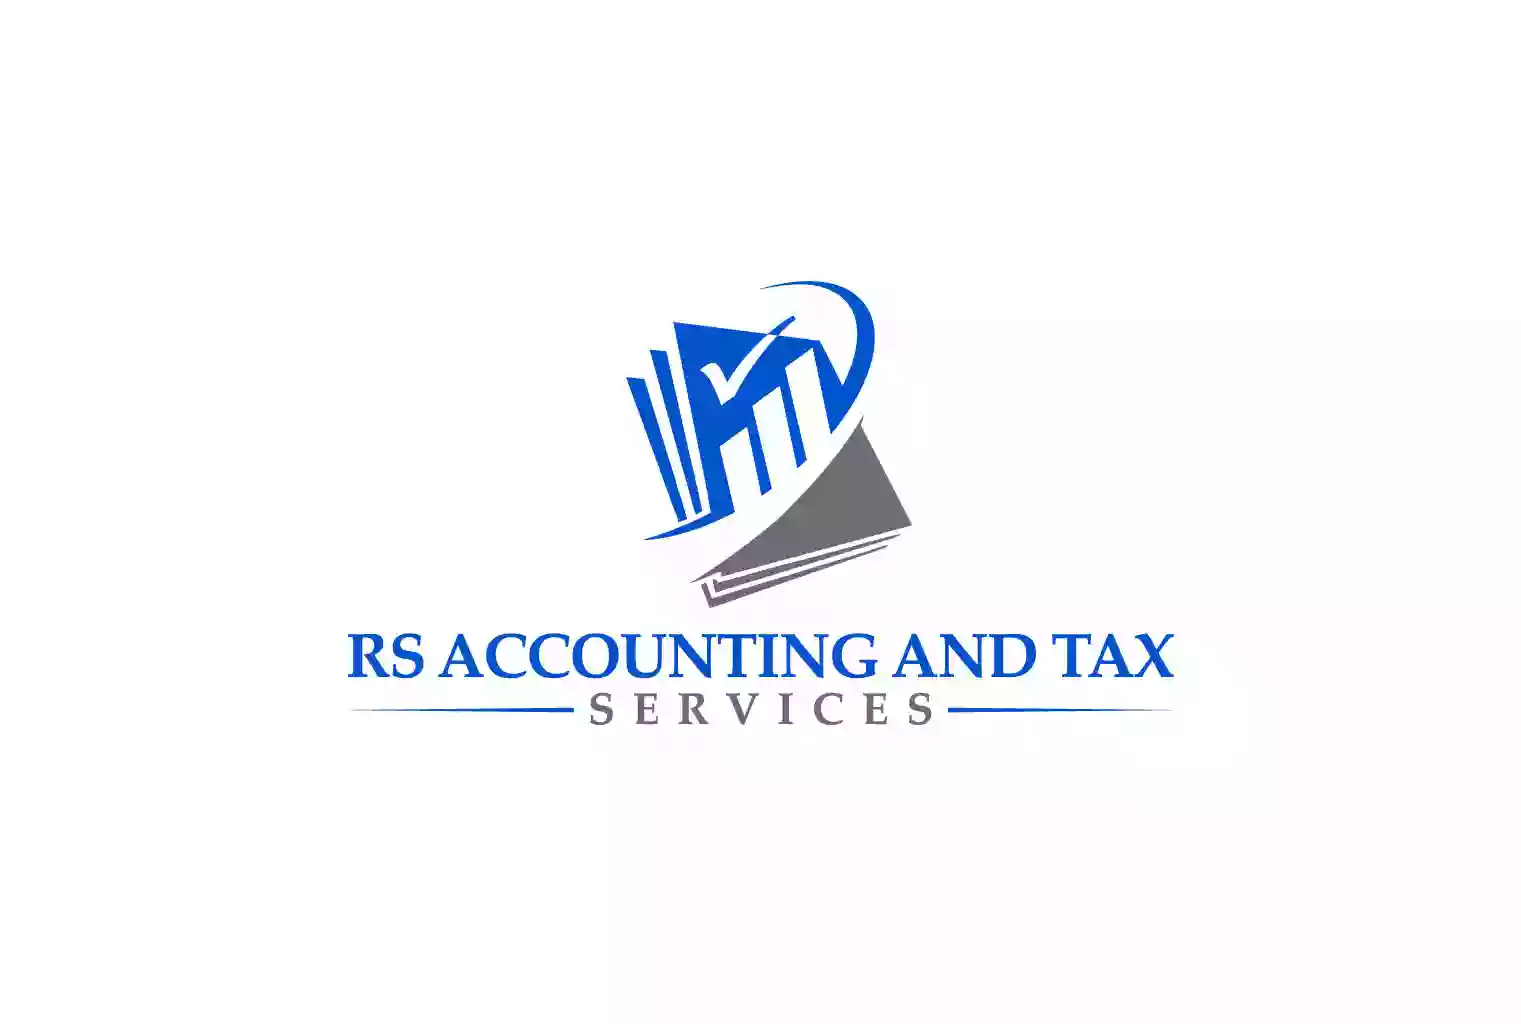 RS ACCOUNTING AND TAX SERVICES INC